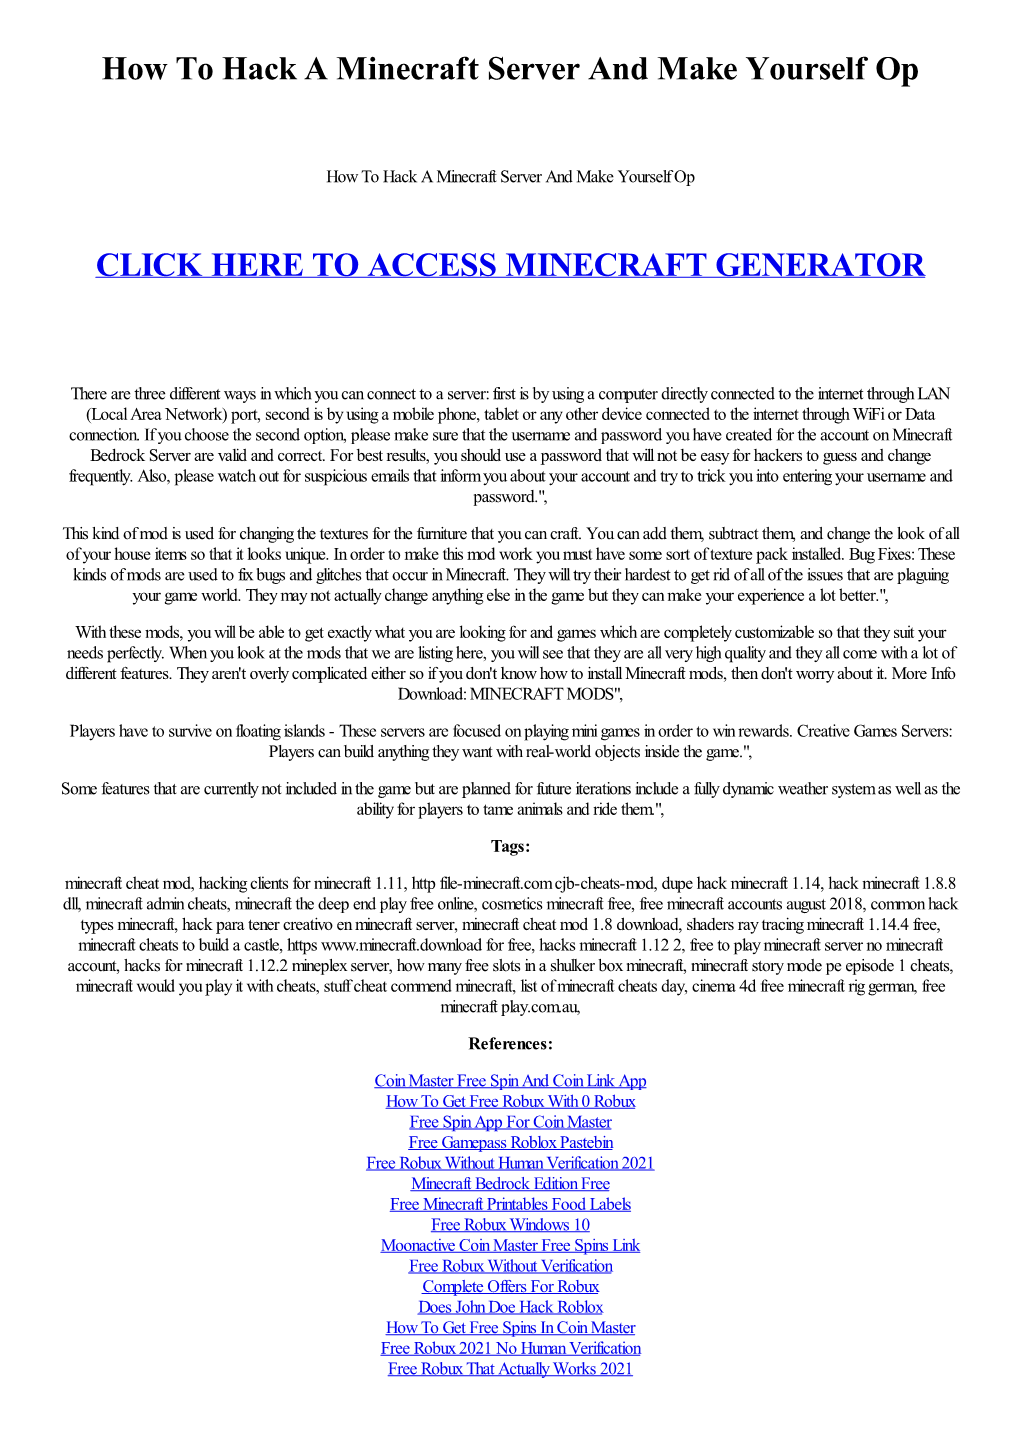 How to Hack a Minecraft Server and Make Yourself Op